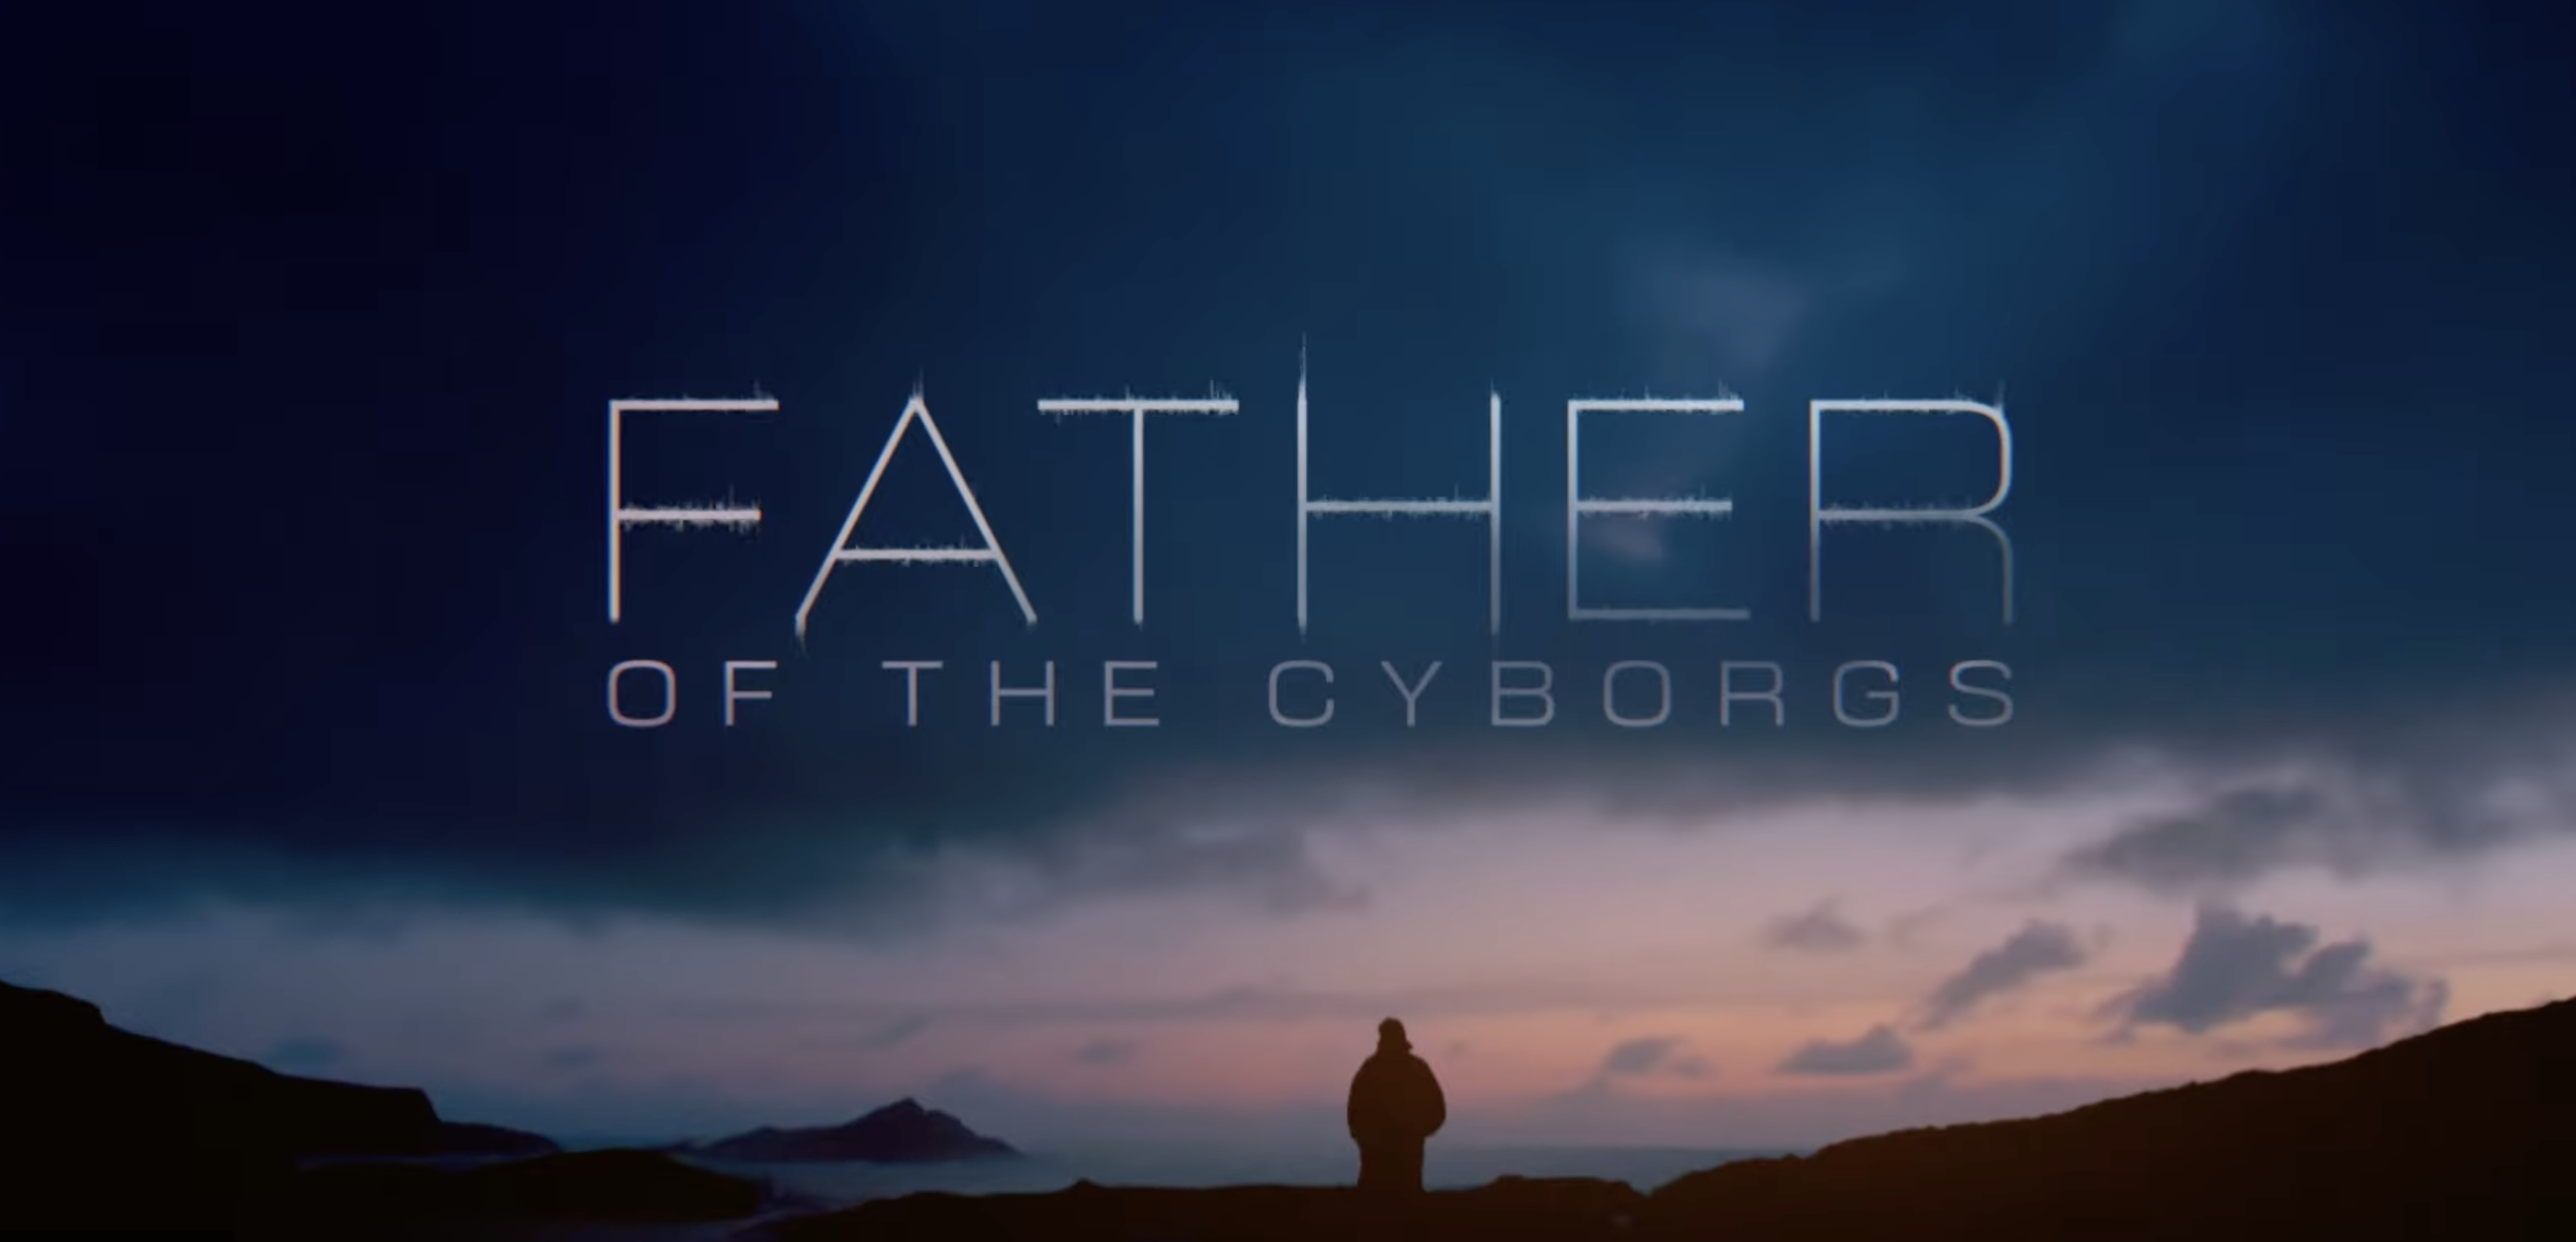 The Father of The Cyborgs – Panel Discussion